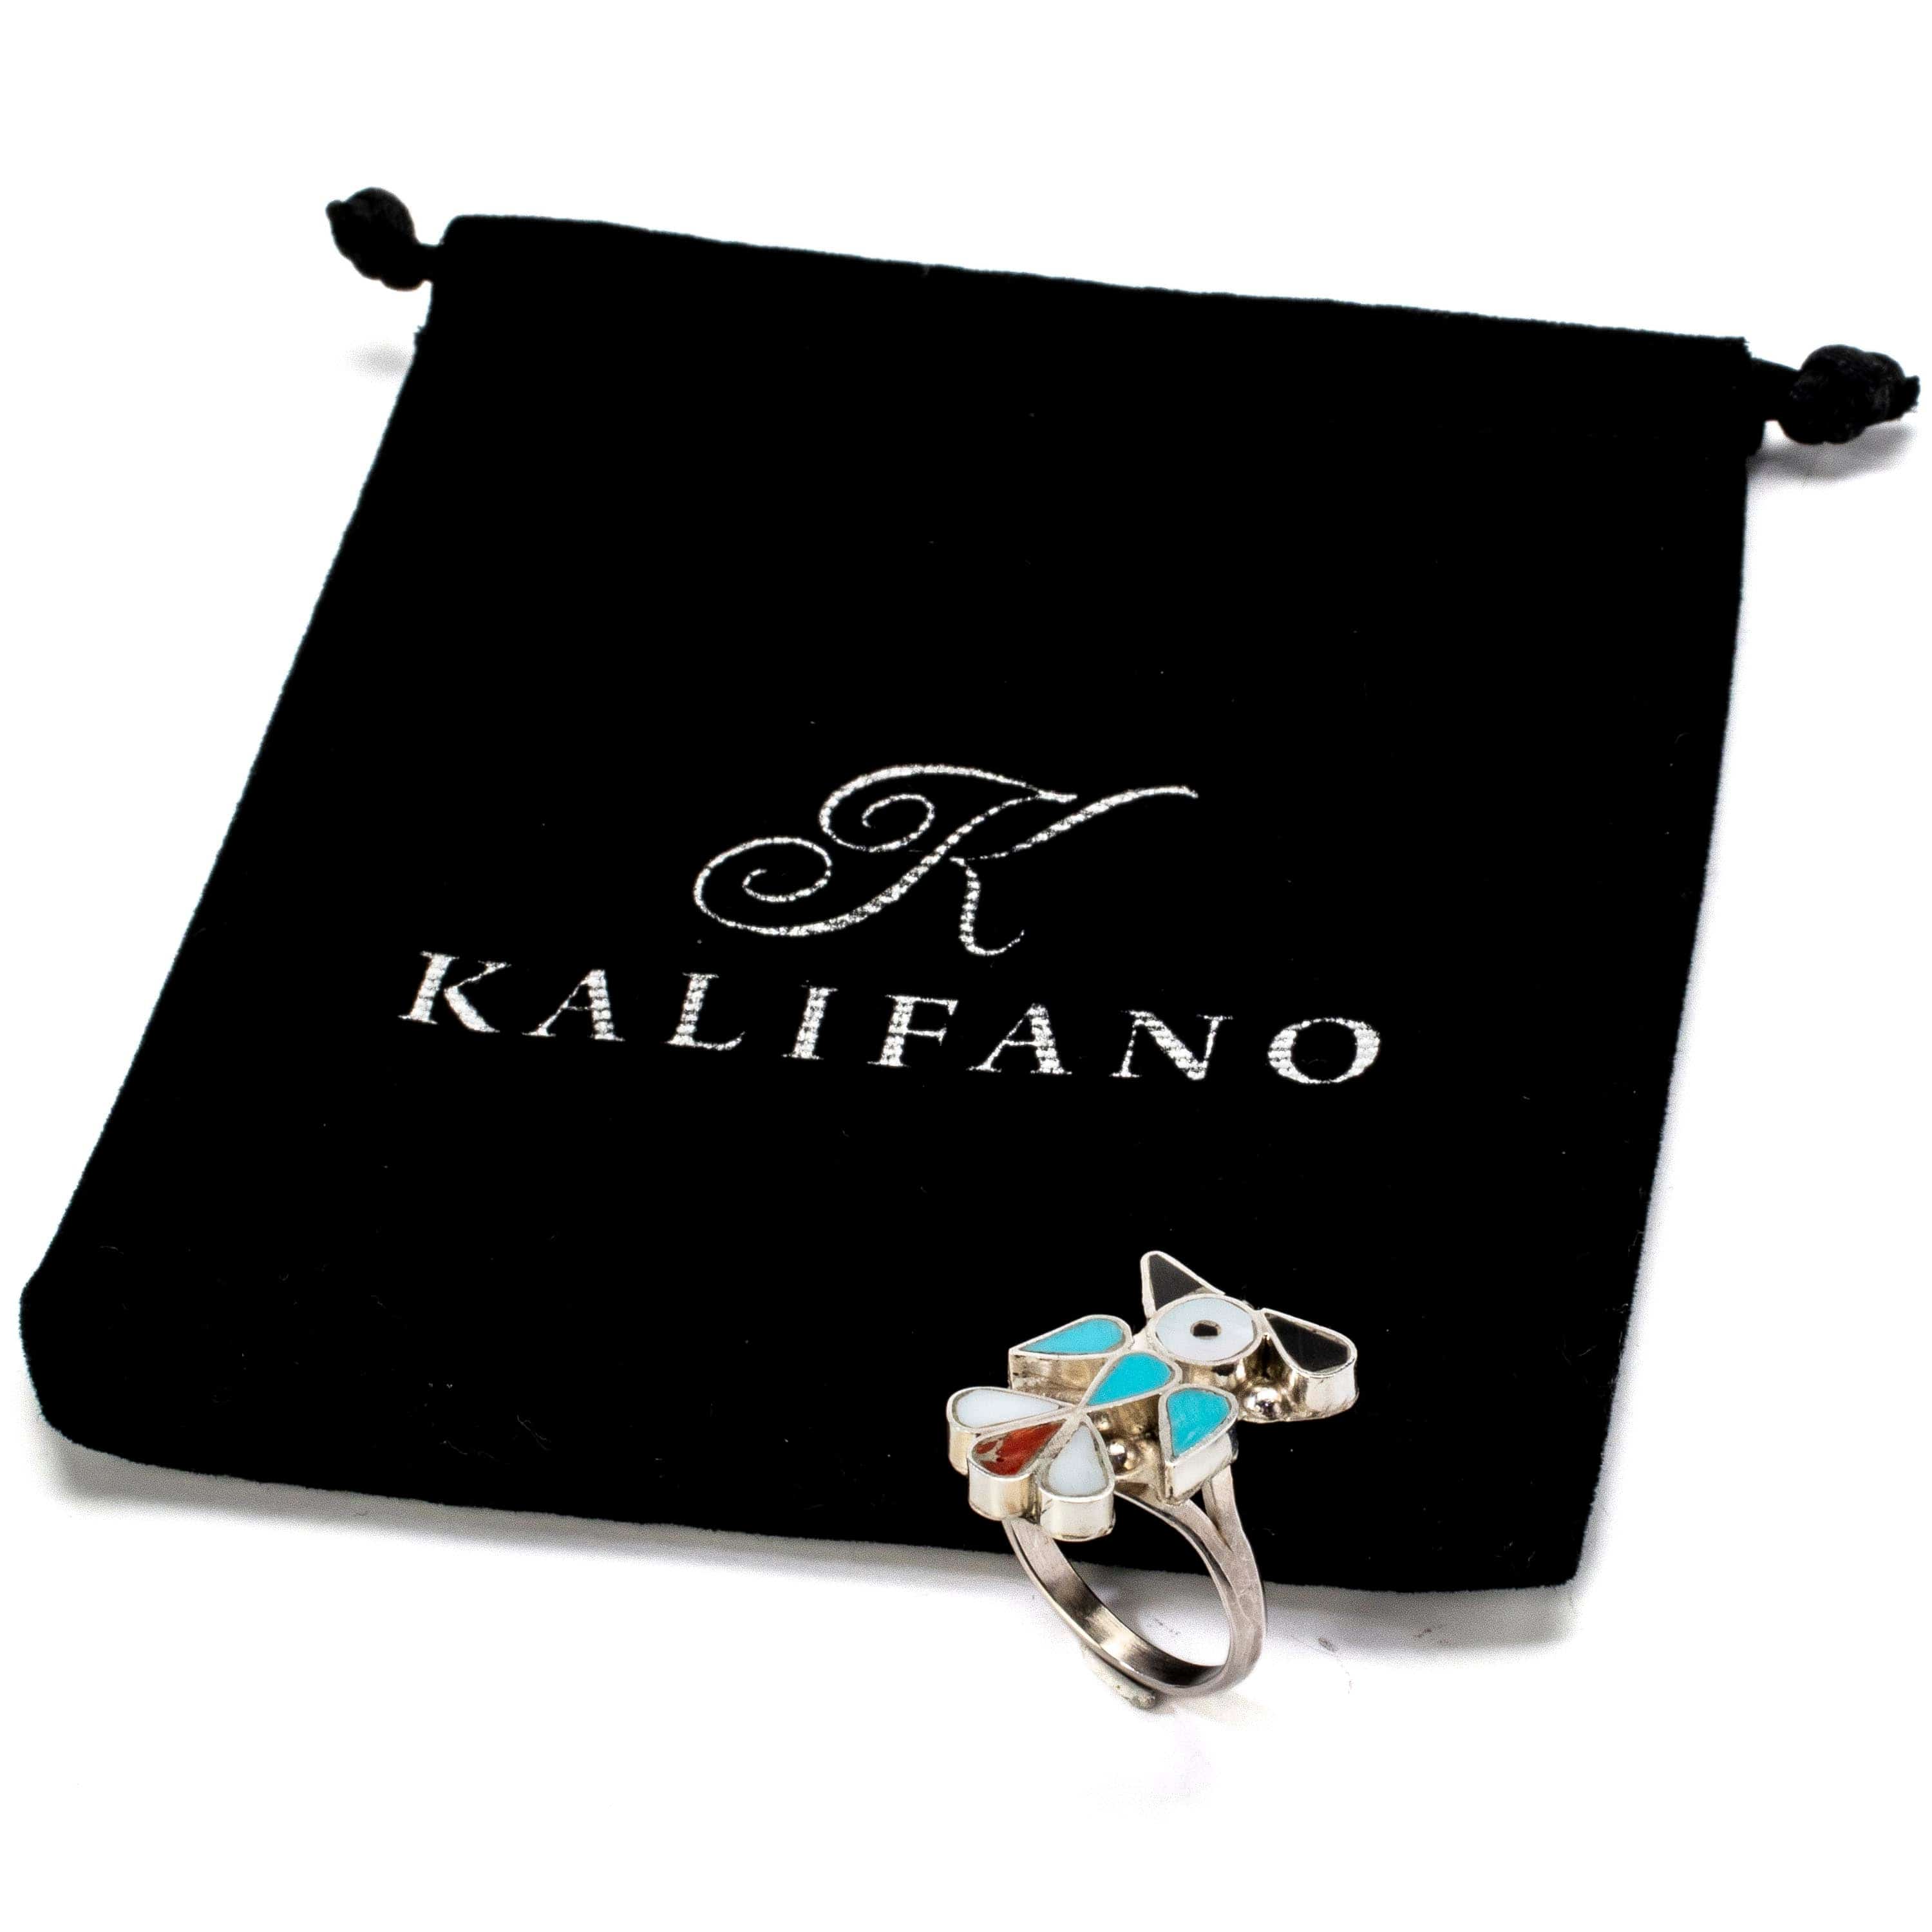 Kalifano Native American Jewelry 8 Pino Yunie Zuni Peyote Bird with Mother of Pearl, Black Onyx, Turquoise, and Coral USA Native American Made 925 Sterling Silver Ring NAR200.020.8